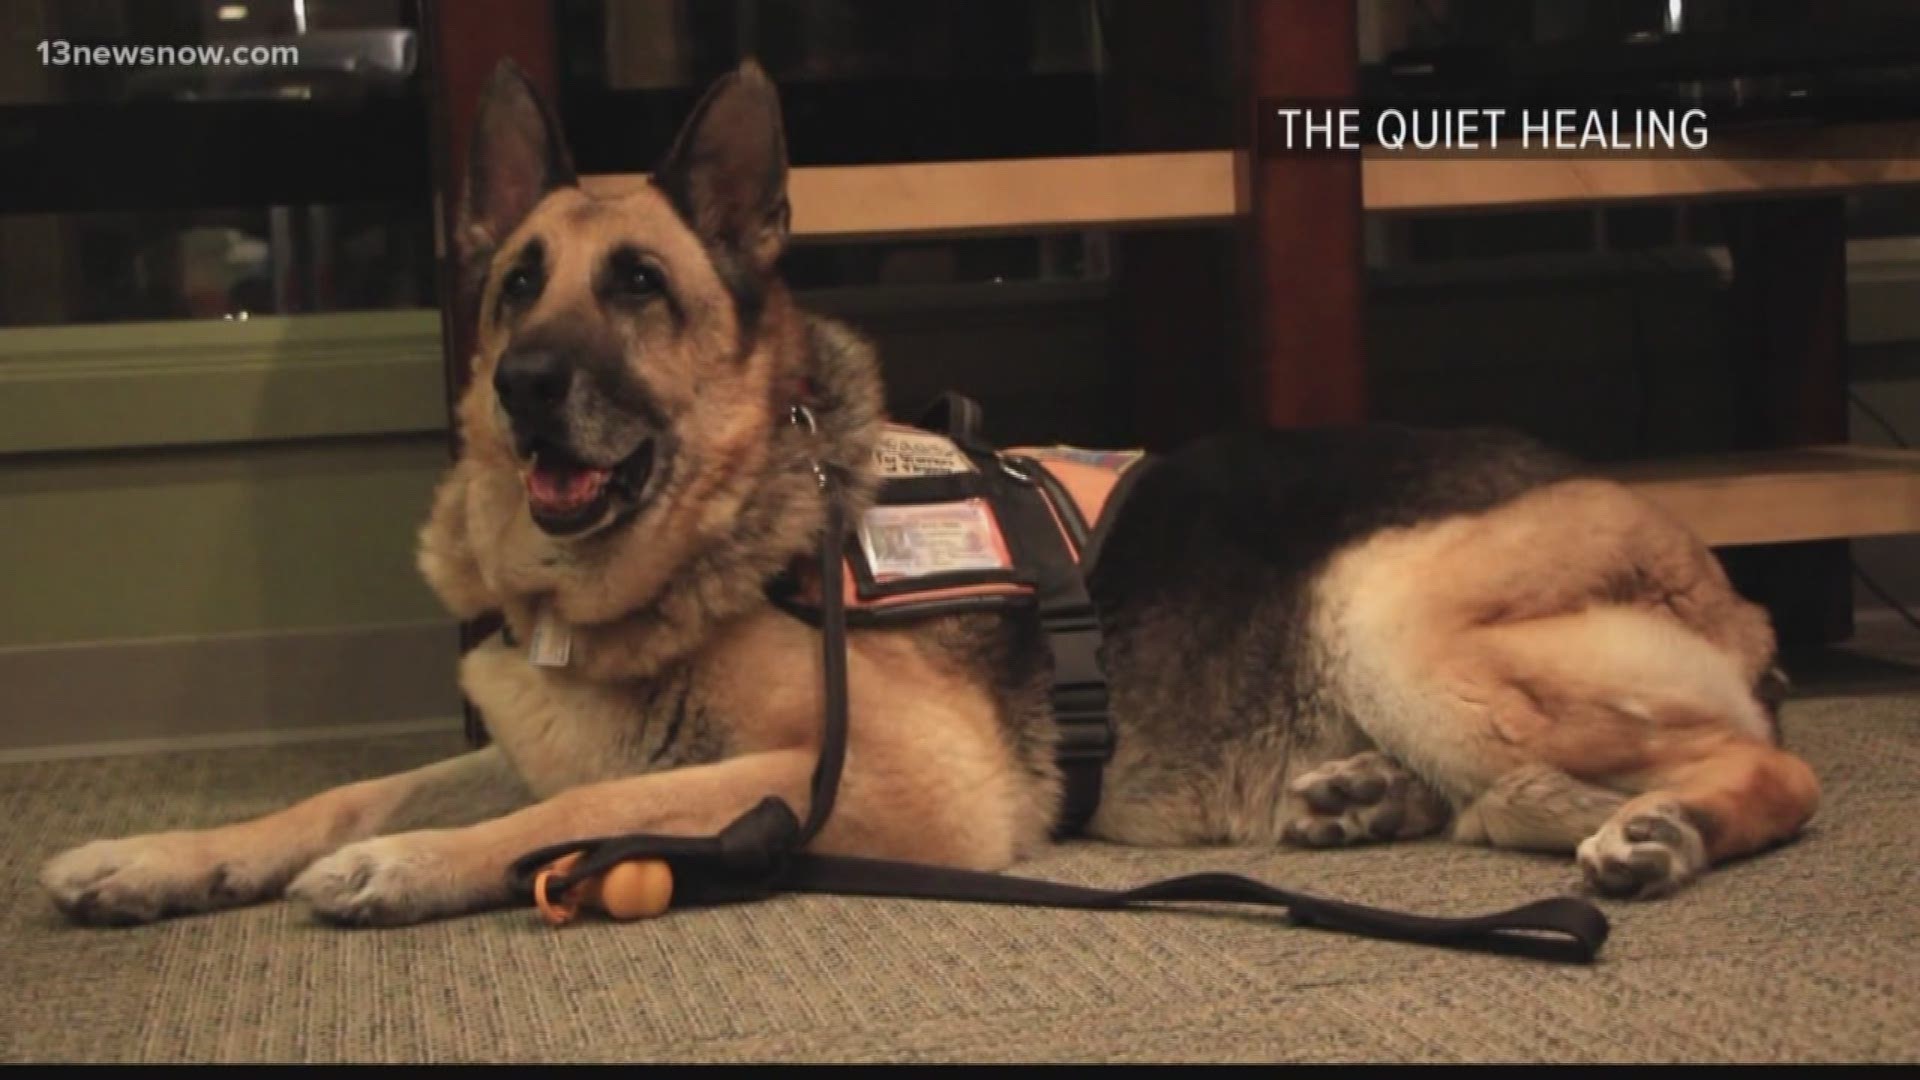 A former sergeant in the U.S. Army was severely injured while on deployment and says his first service dog helped save his life. A film crew is turning his story into a documentary to spread awareness and make a difference in the lives of other veterans.